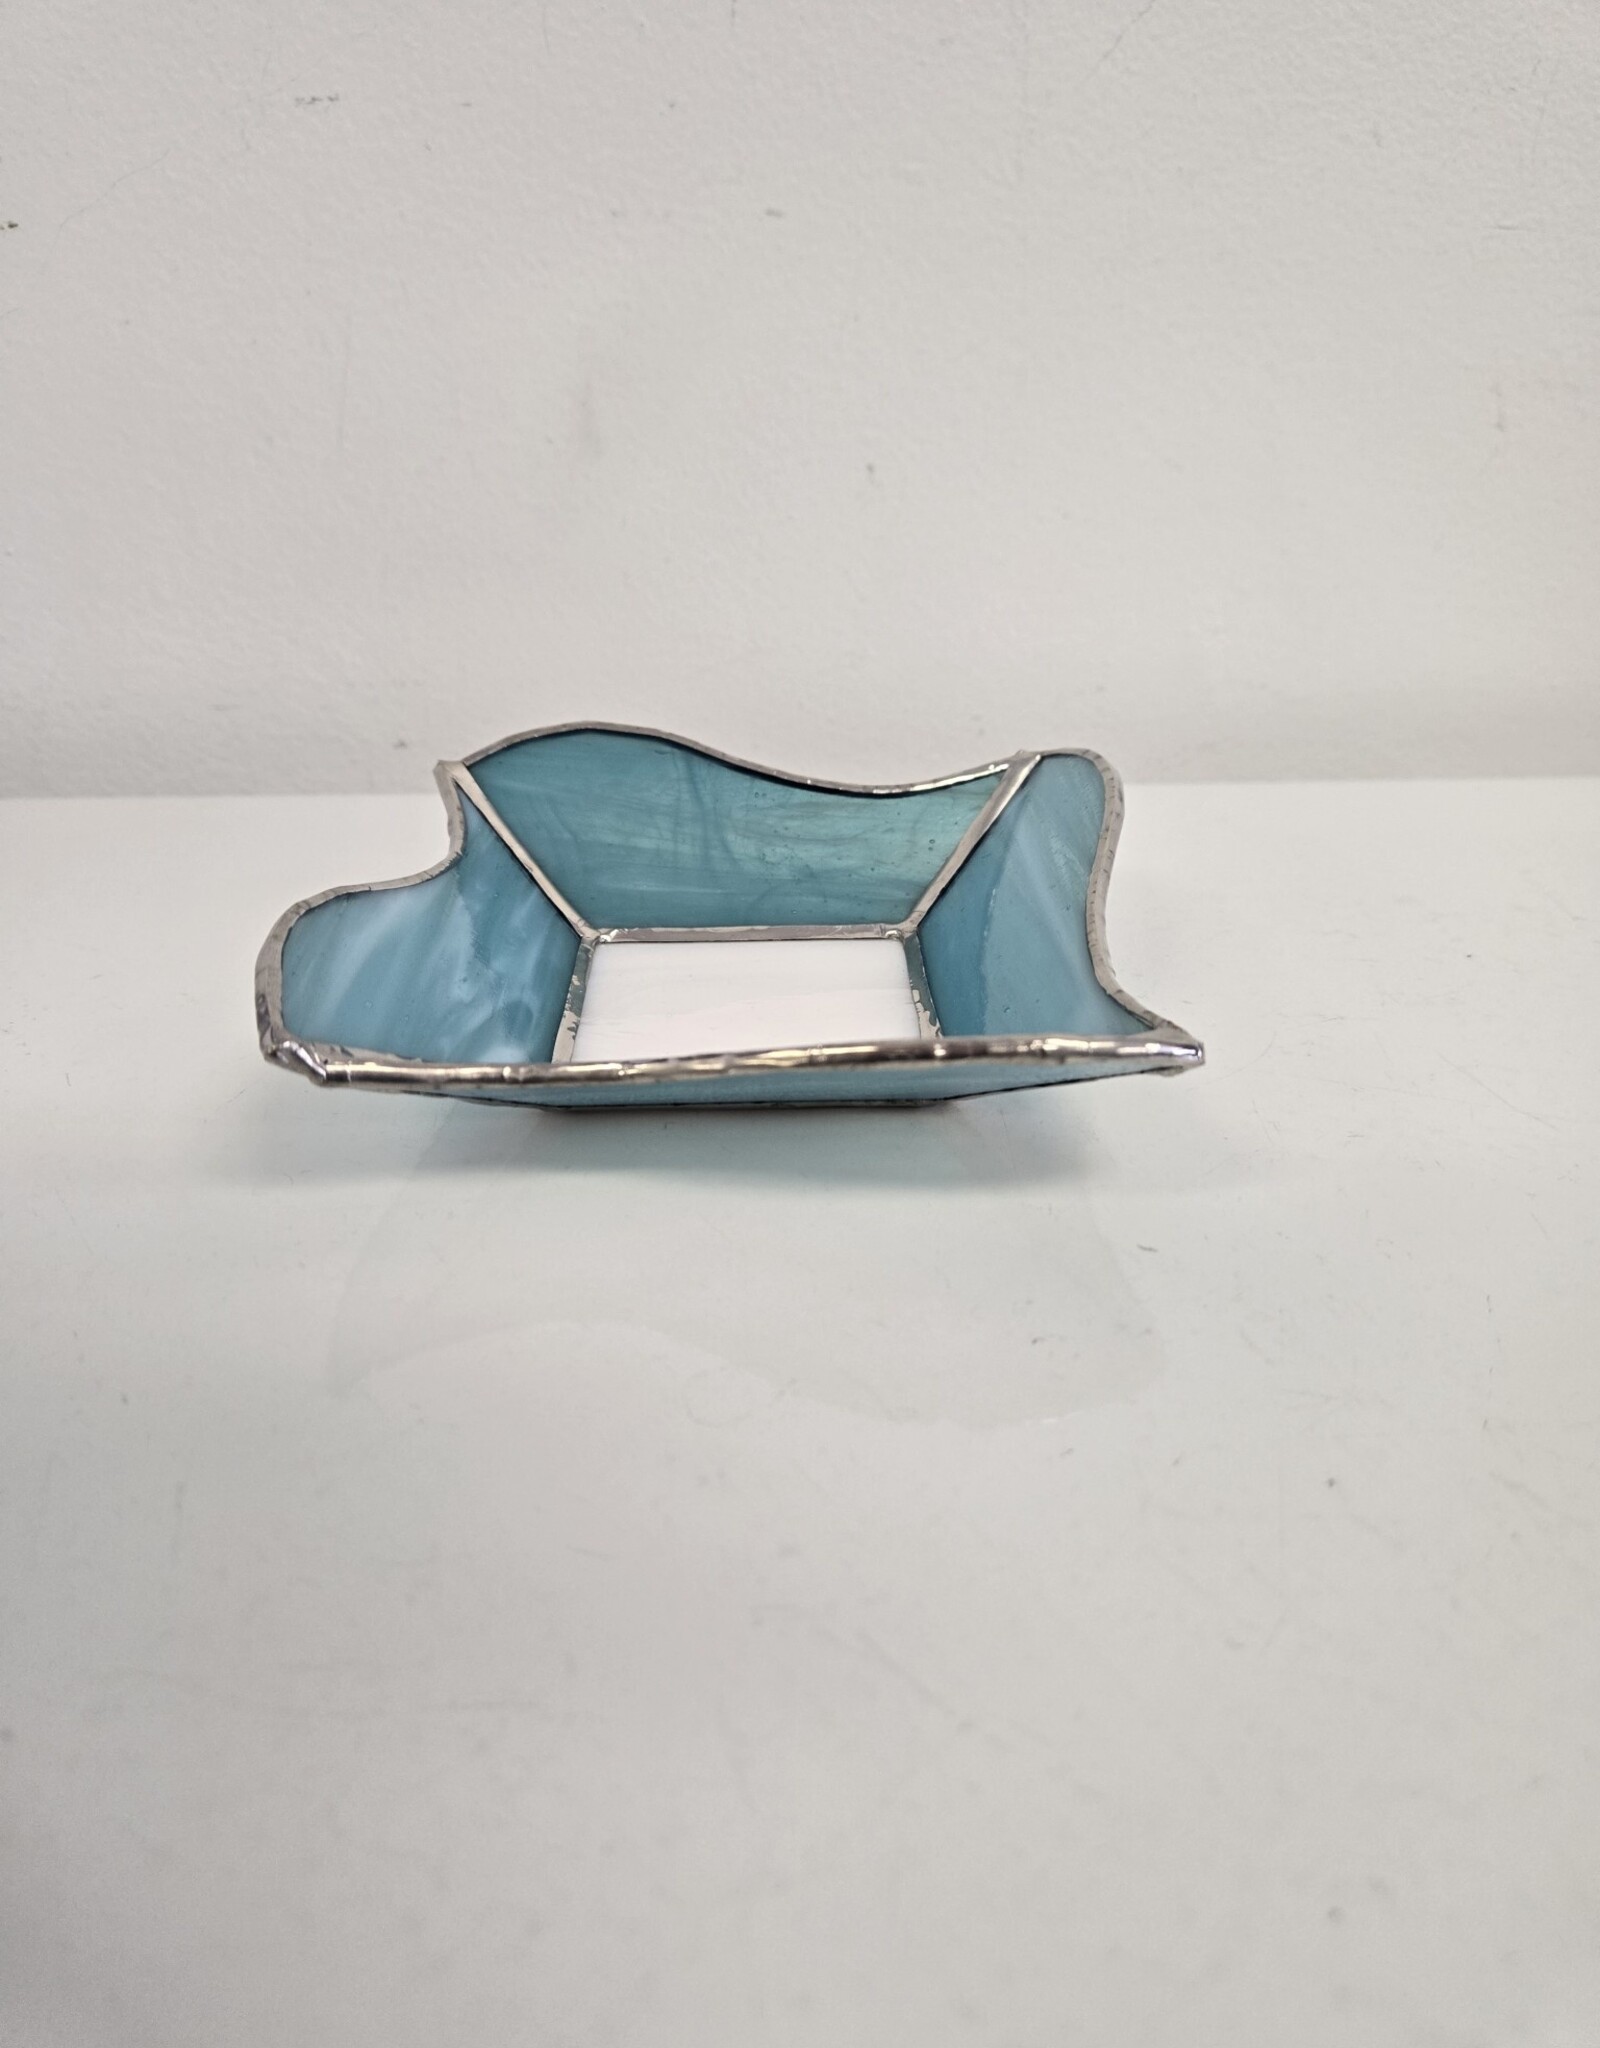 Stained Glass Dish 5"x5"x1.5" - blue & white